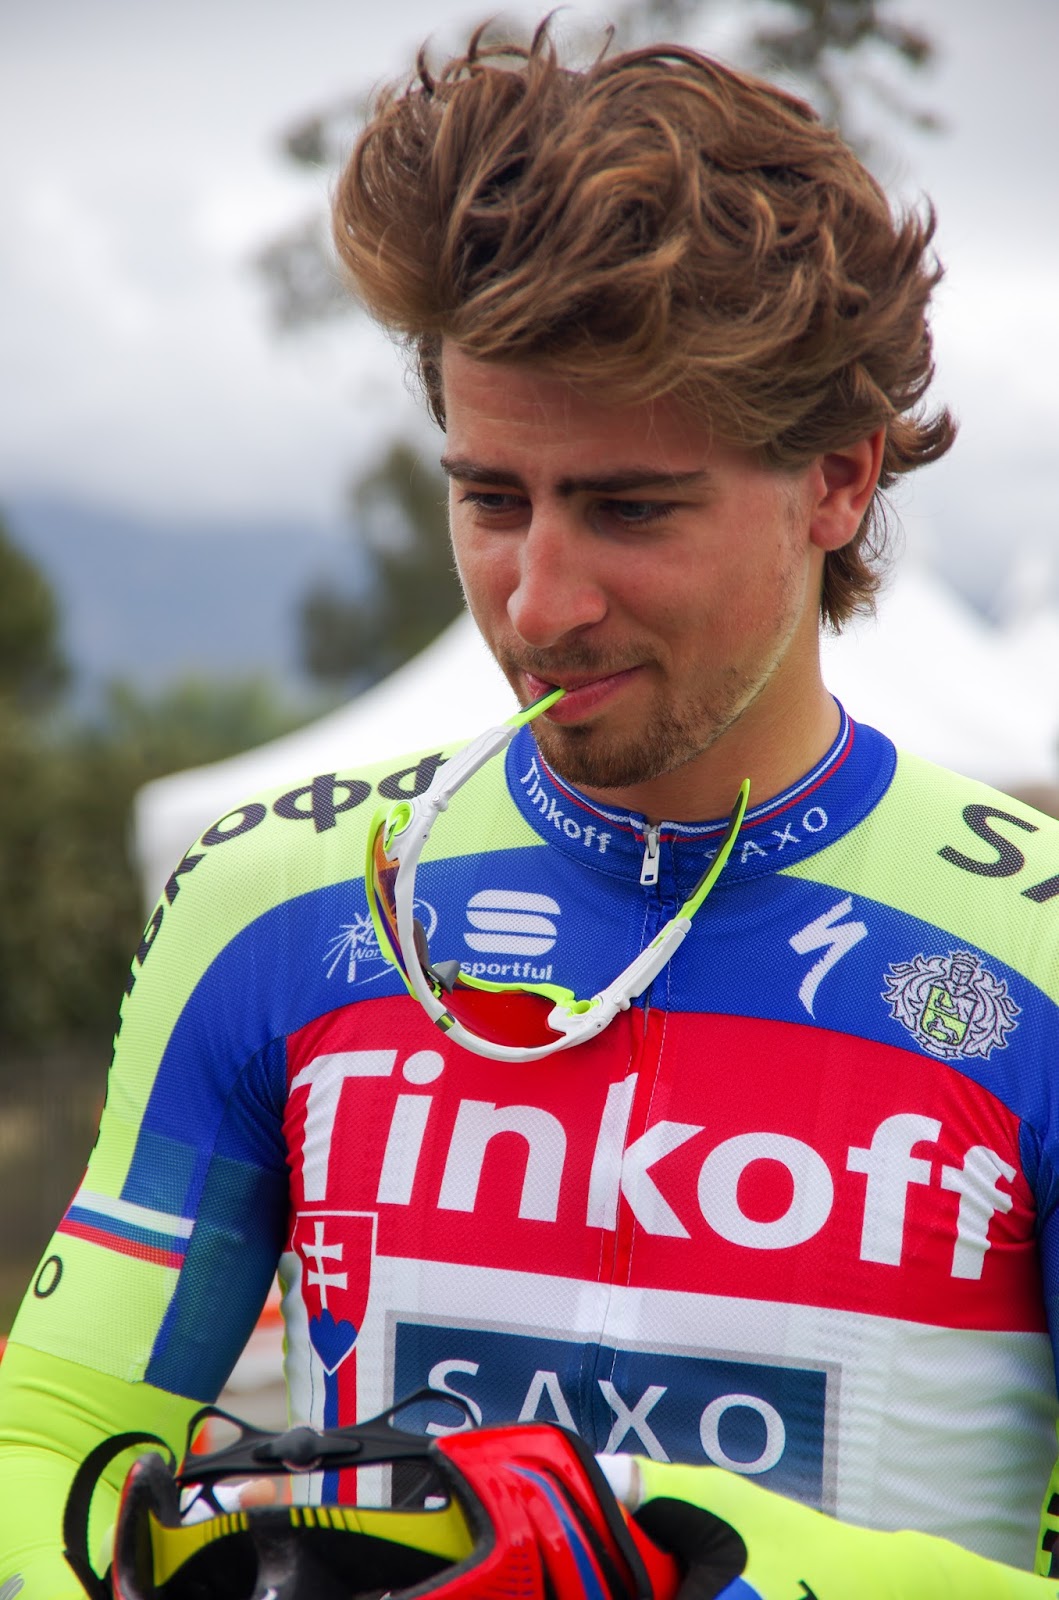 How to put on a helmet by Peter Sagan - Pedal Dancer®